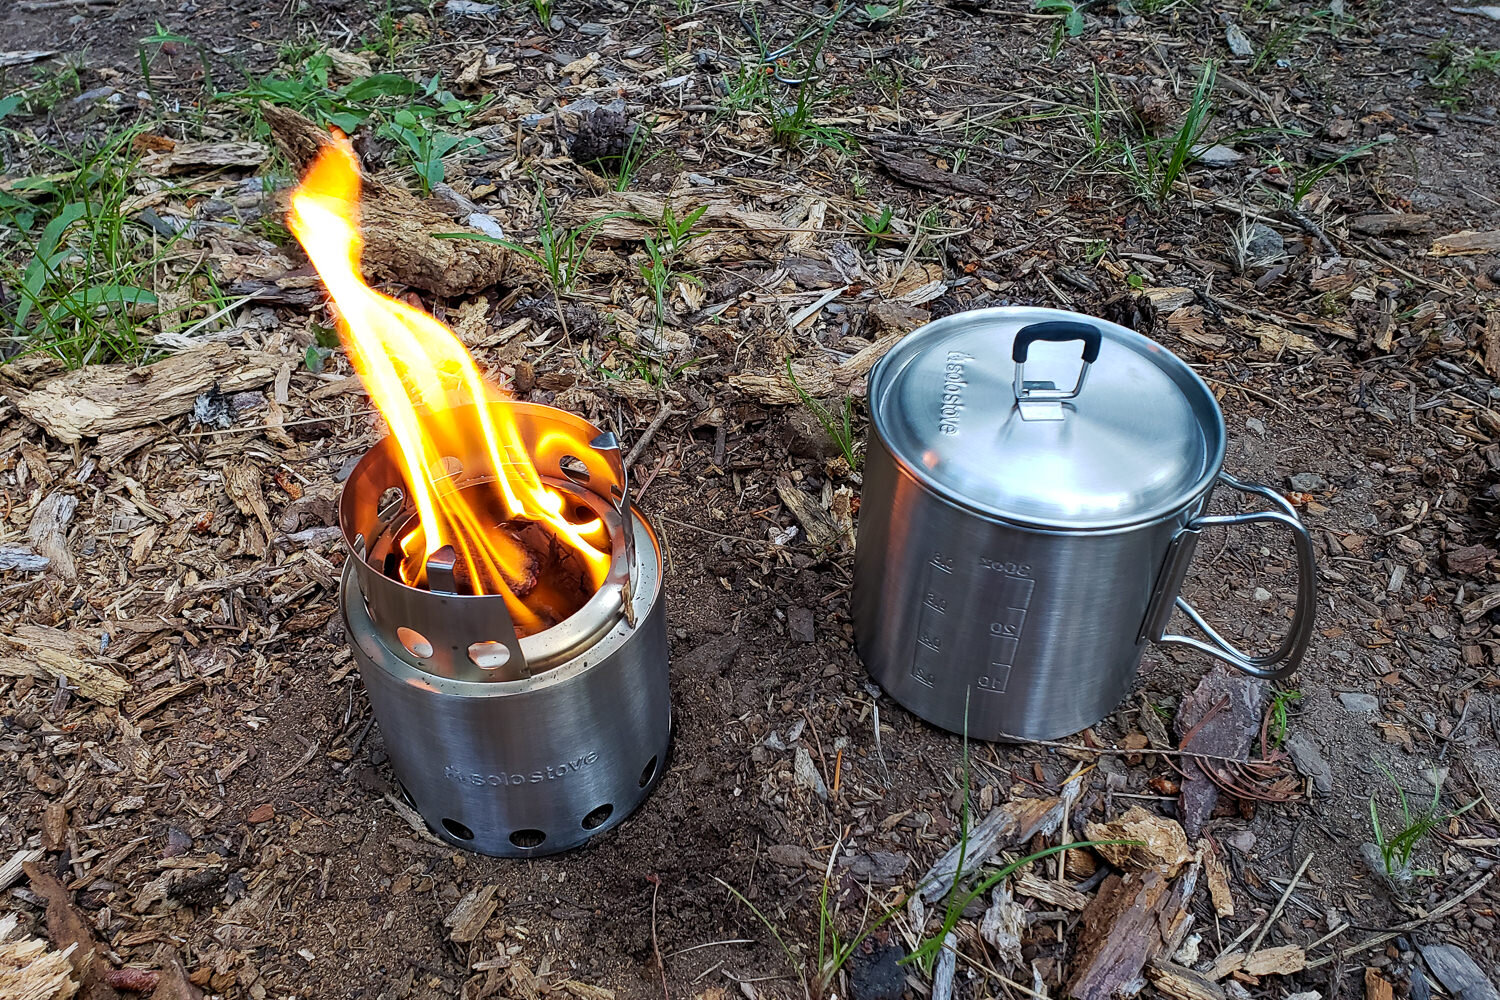 The Solo Stove Lite and the Pot 900